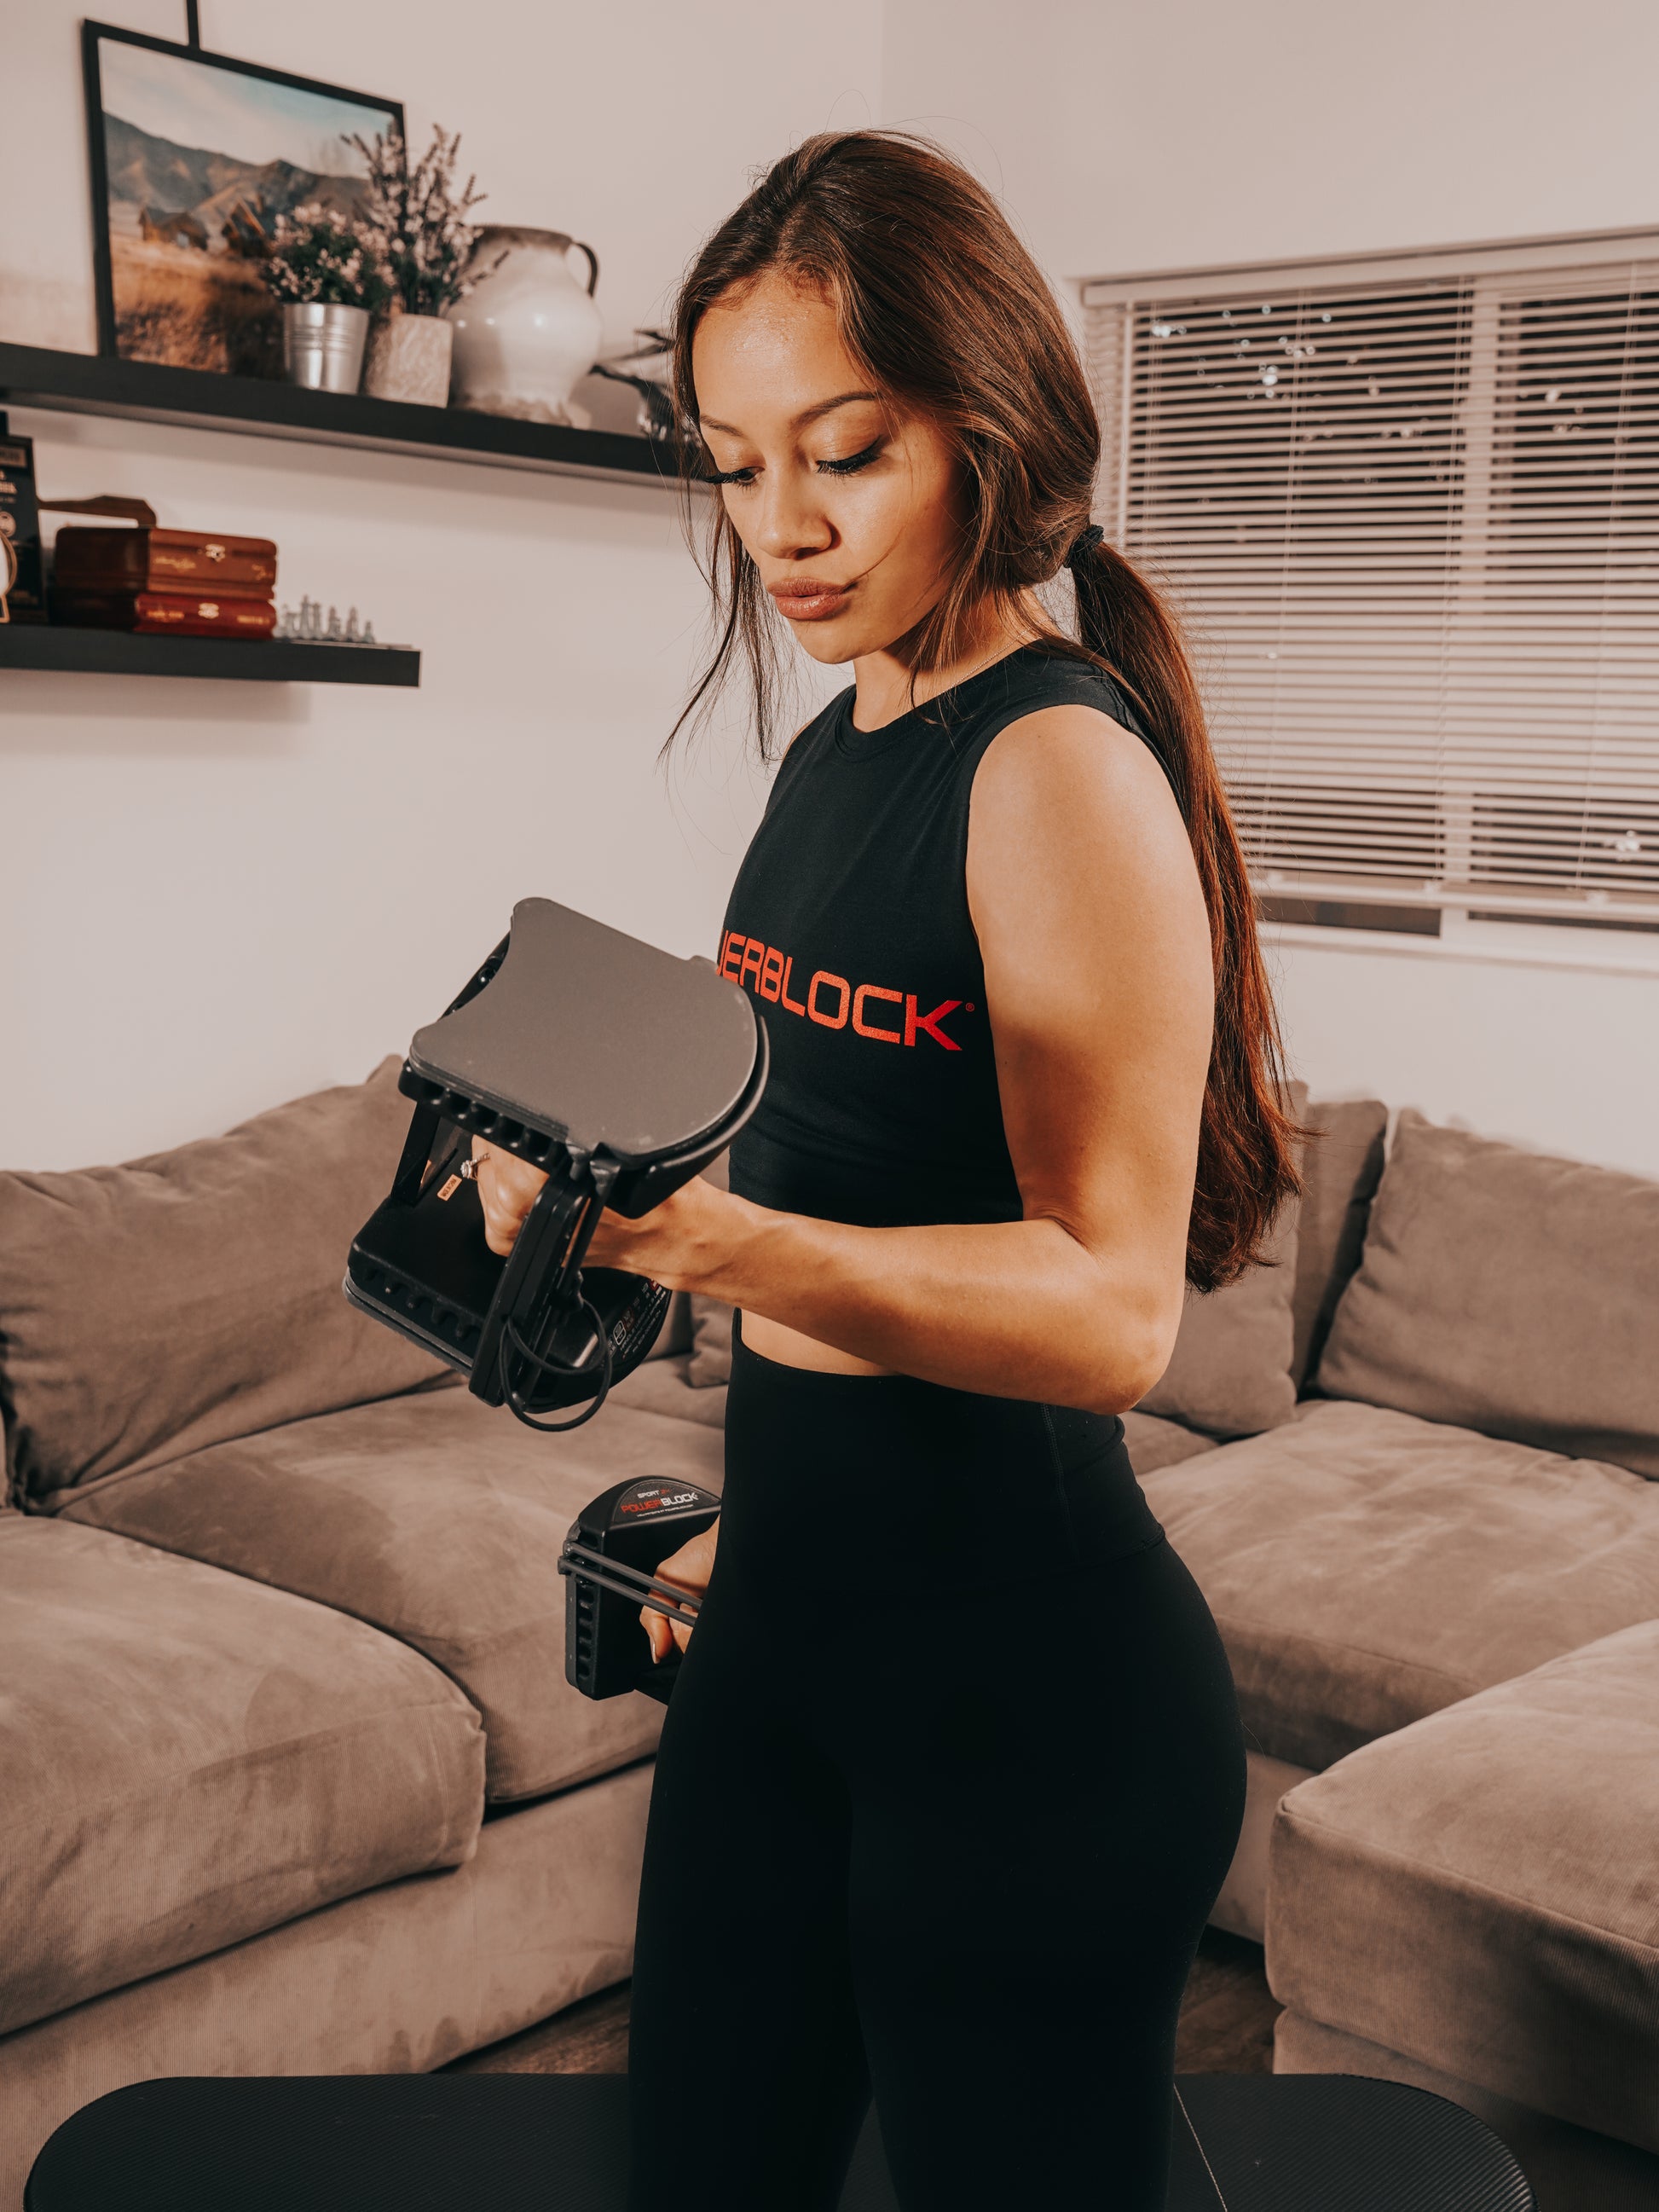 Woman doing a bicep curl with a Powerblock 24 adjustable dumbbell.